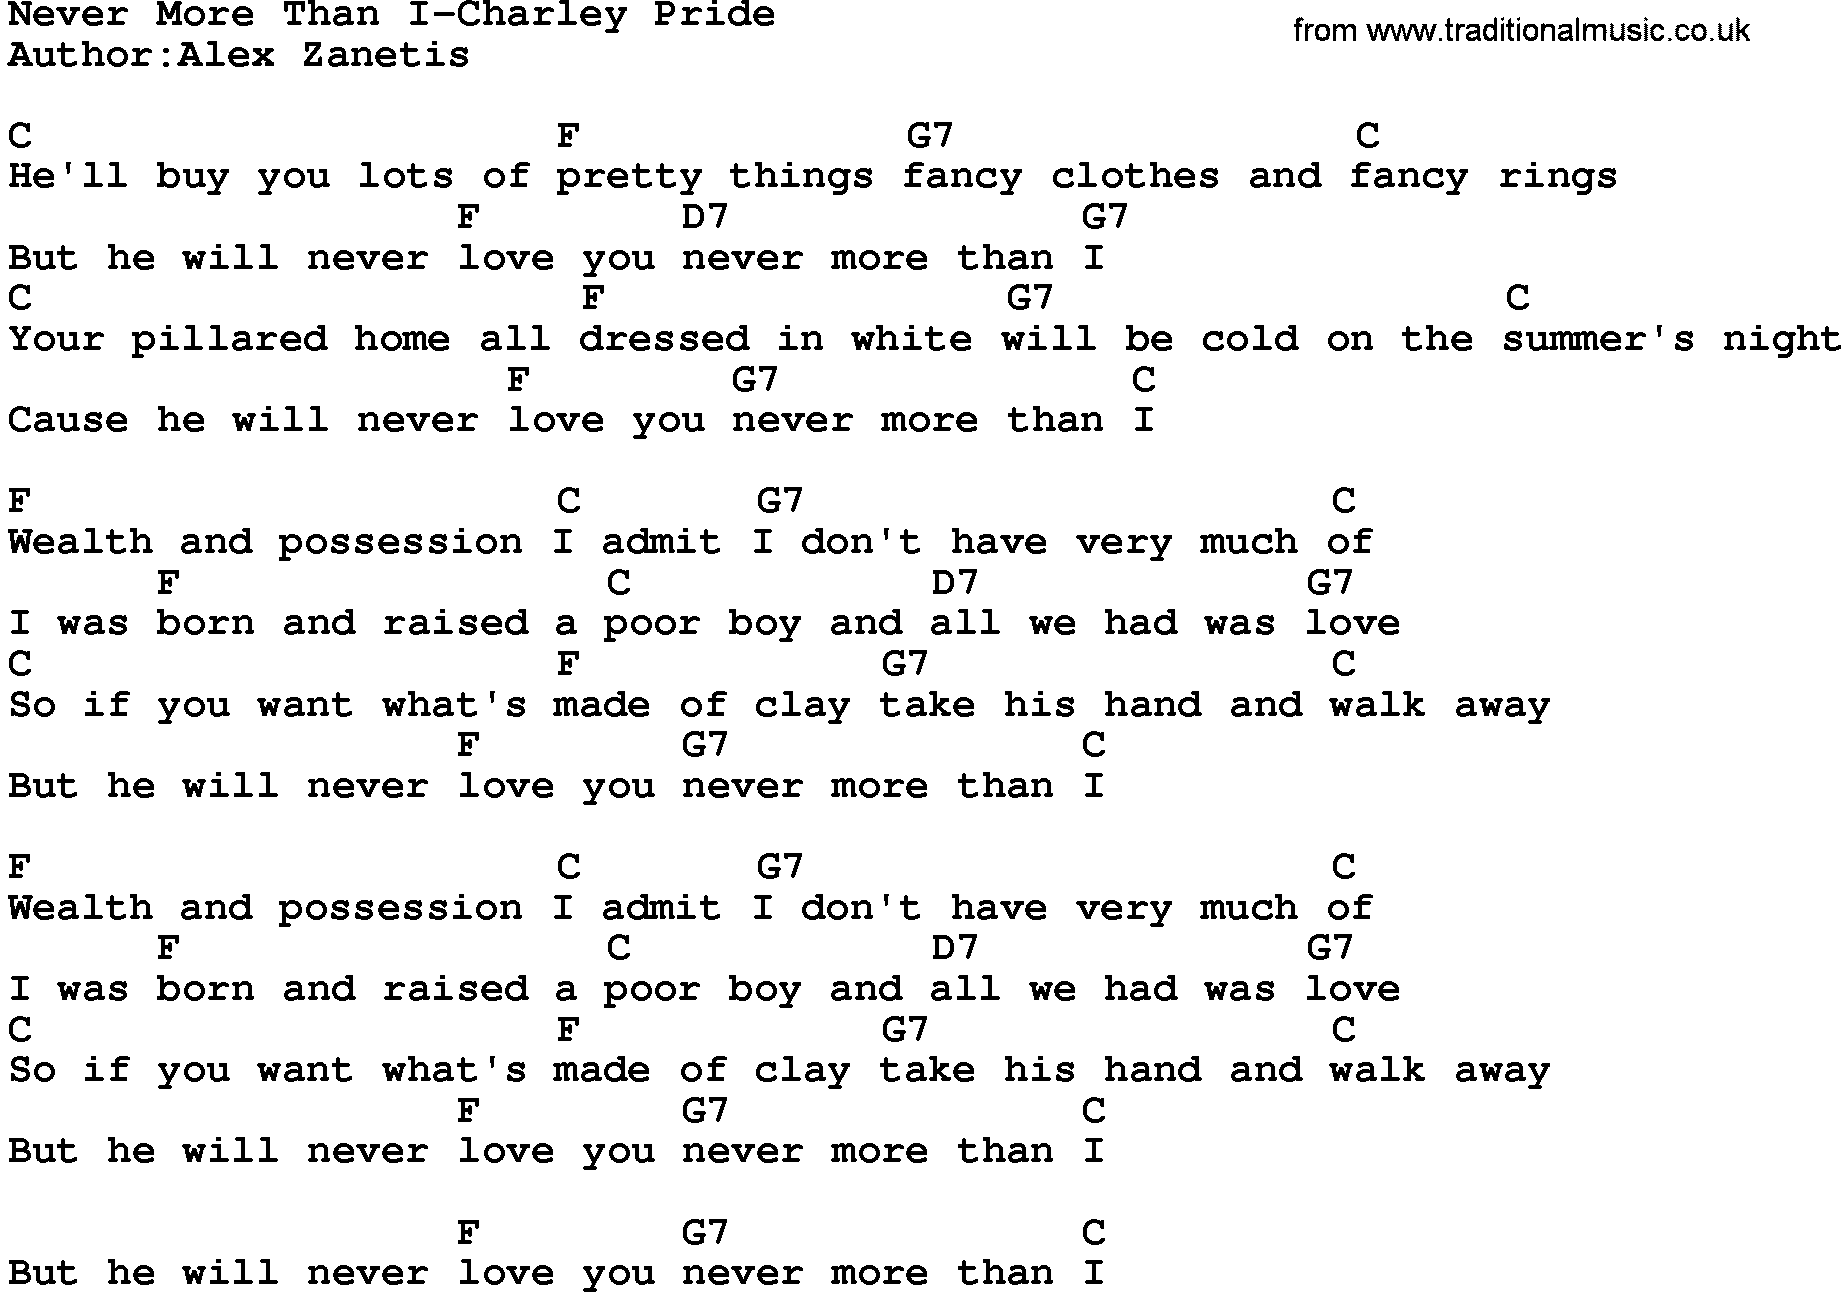 Country music song: Never More Than I-Charley Pride lyrics and chords